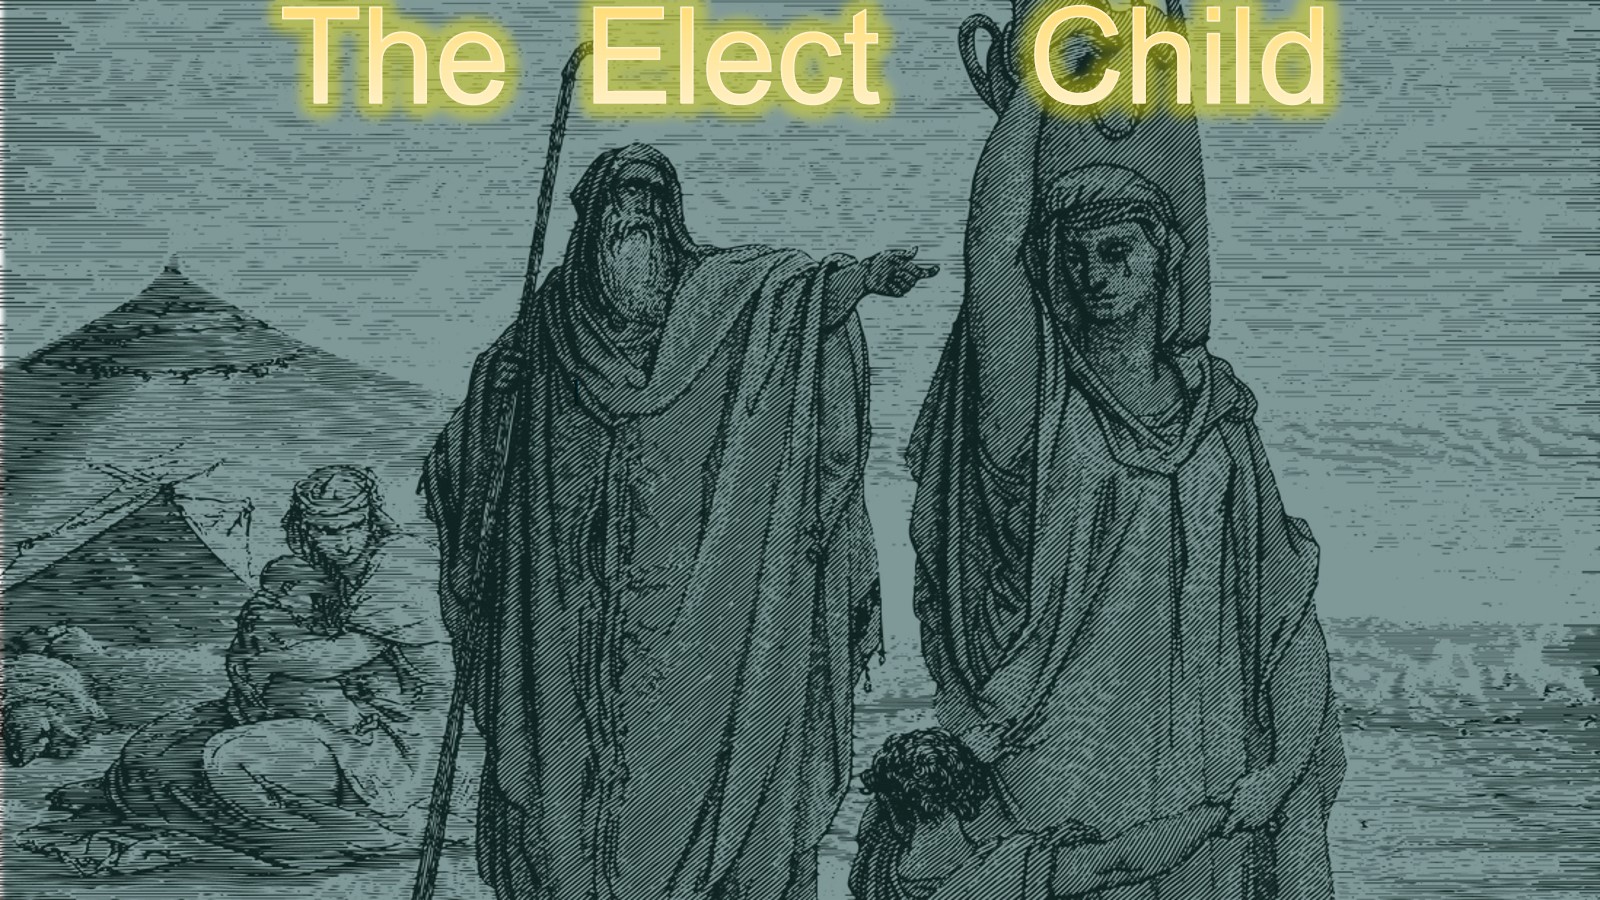 The Elect Child